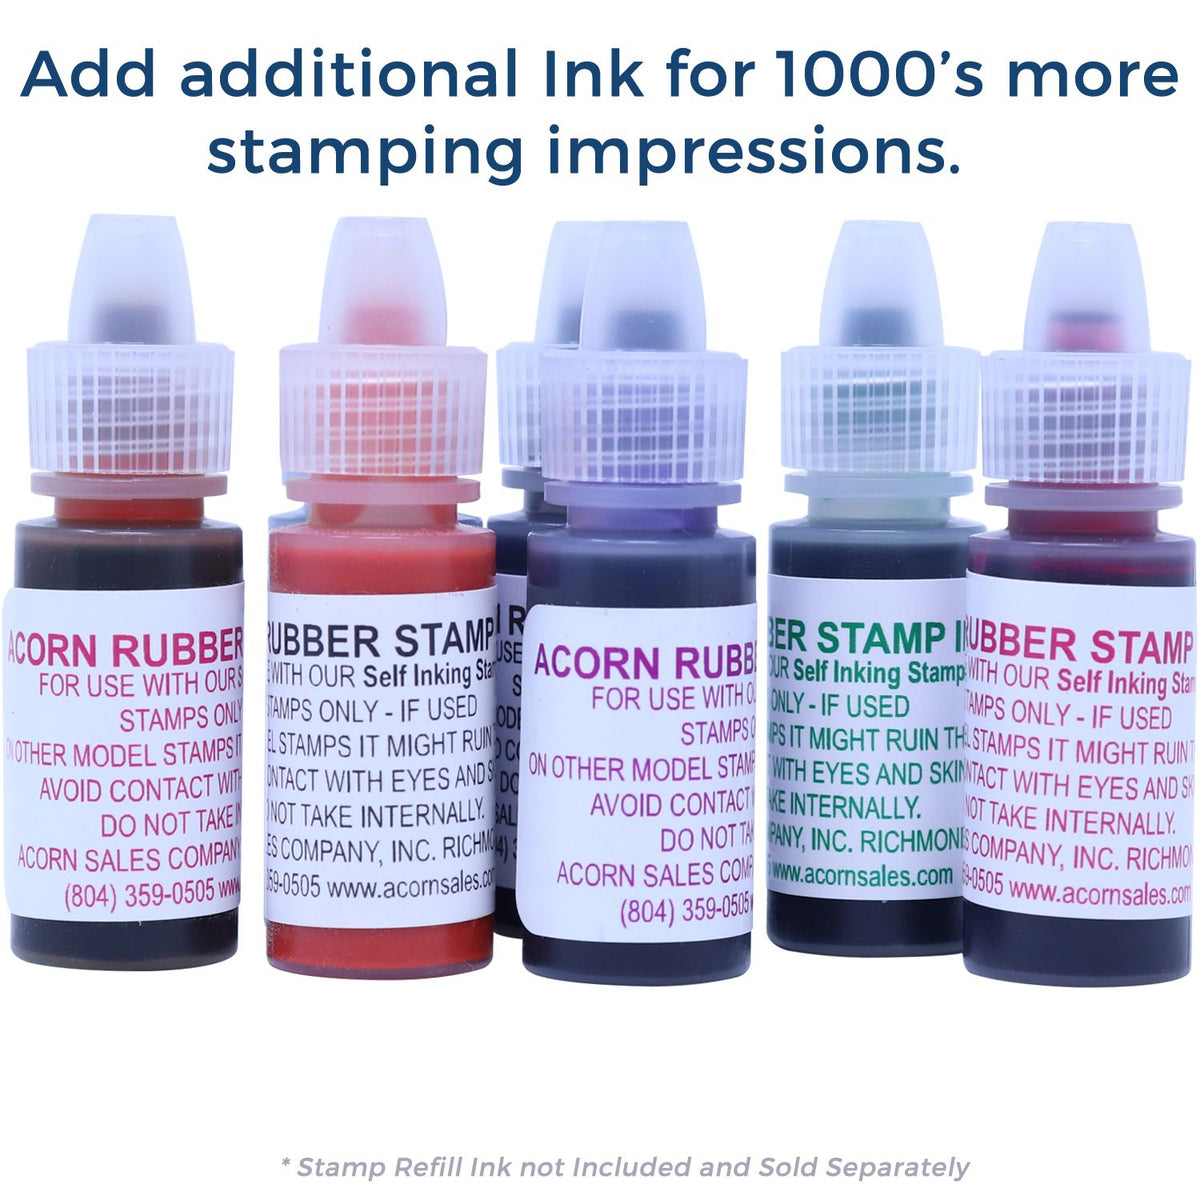 Refill Ink for Self-Inking Round Check Your Work Stamp Available